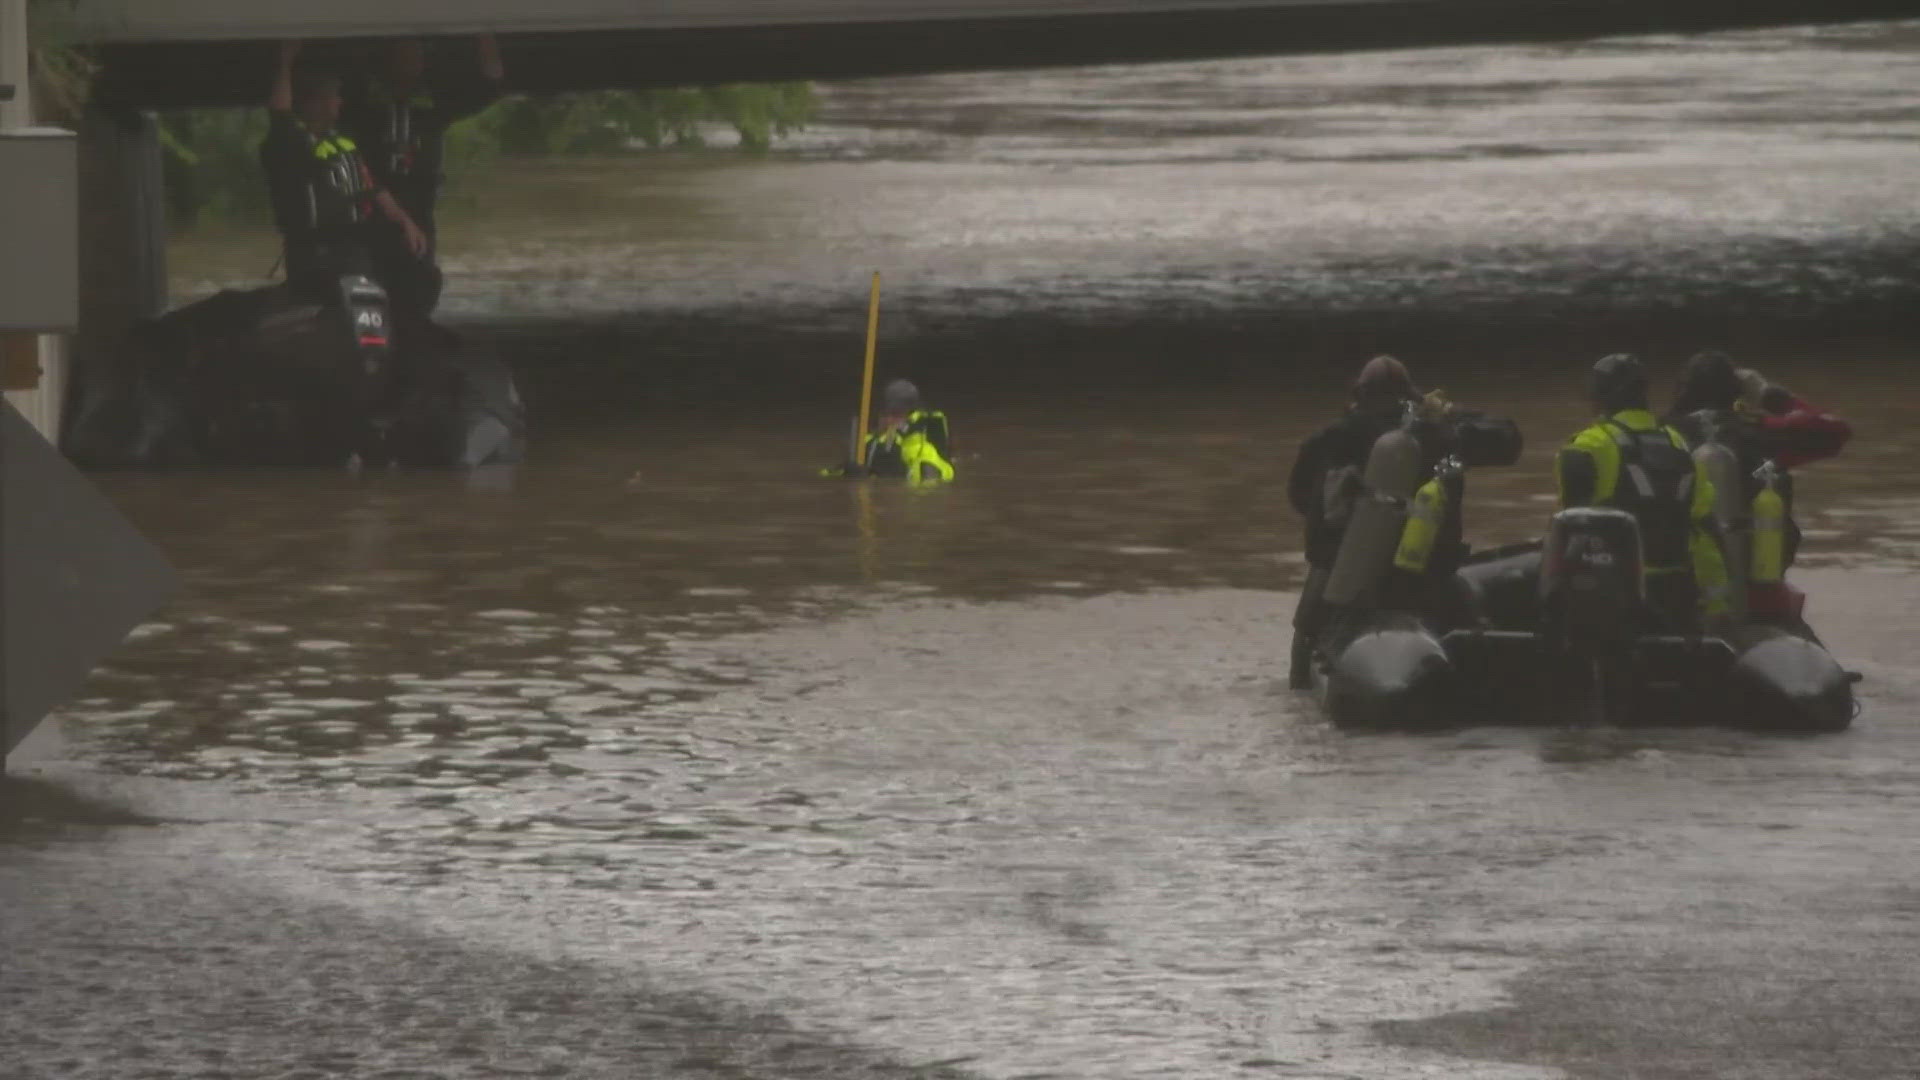 Information Security Officer Russell Richardson, 54, was on his way to work when he exited I-45 and ran into high water at the Houston Avenue underpass.